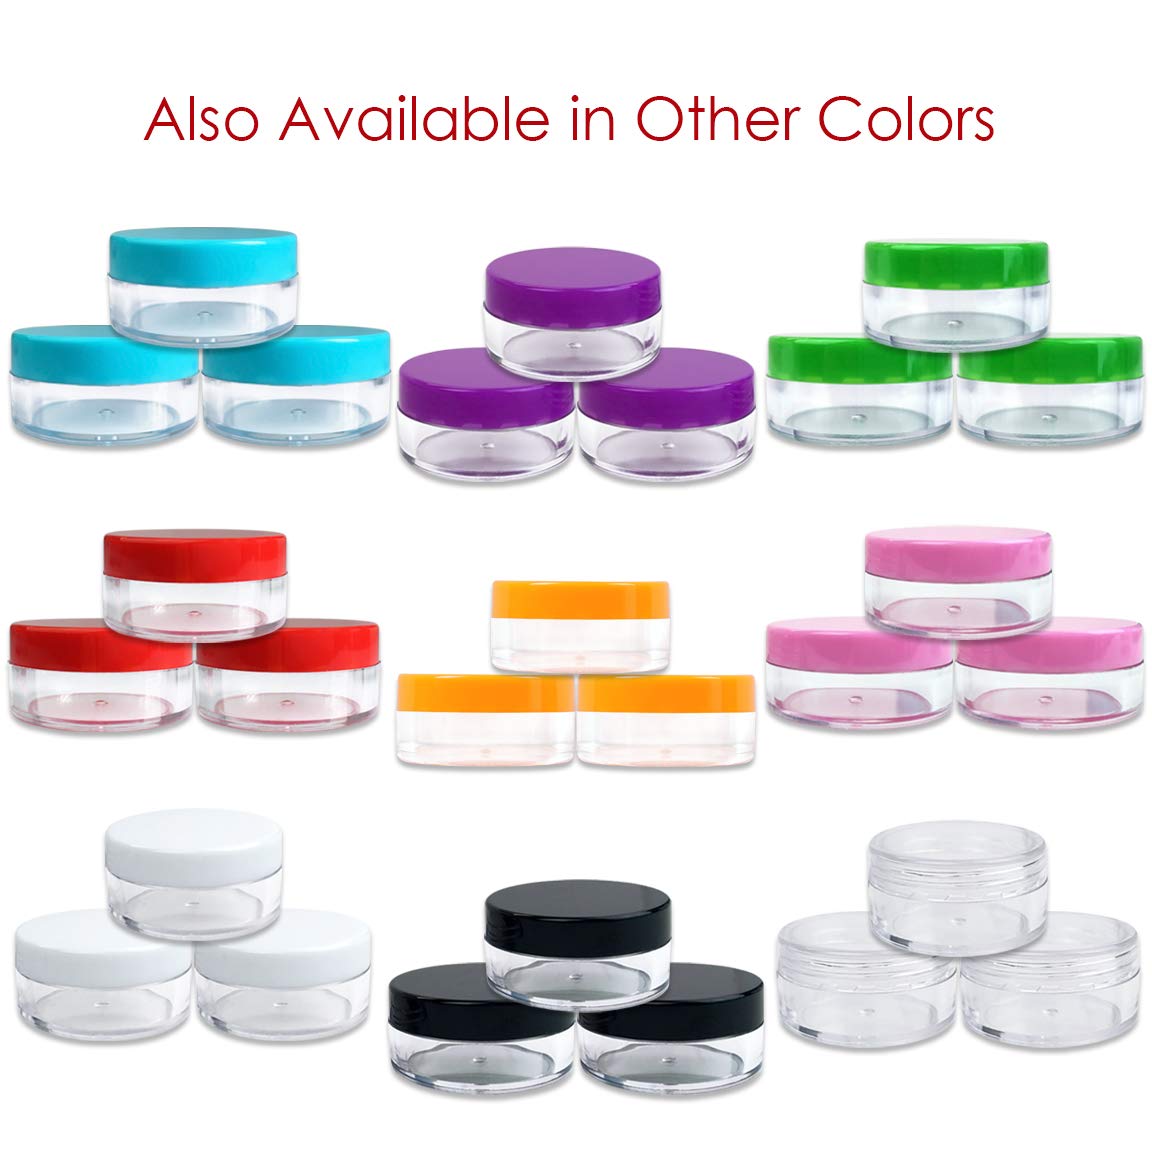 (Quantity: 300 Pieces) Beauticom® 10G/10ML High Quality Round Clear Jars with Screw Cap Lids for Small Jewelry, Holding/Mixing Paints, Art Accessories and Other Craft Supplies - BPA Free